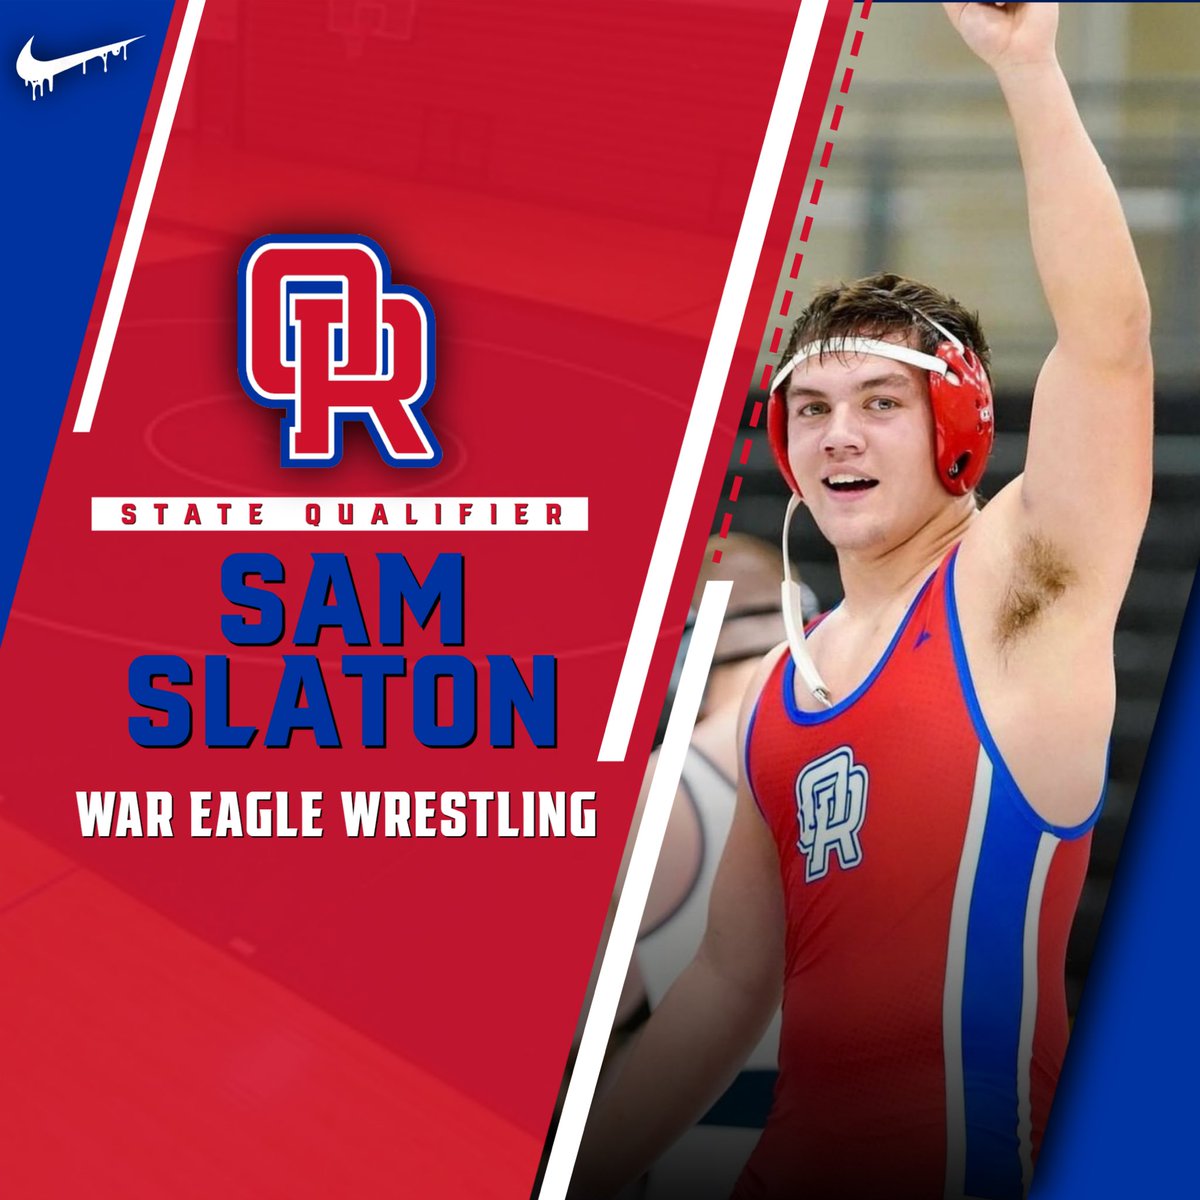 Congratulations to War Eagle Football’s Sam Slaton for qualifying for the state wrestling tournament! #WarEagle 🔵🔴🦅